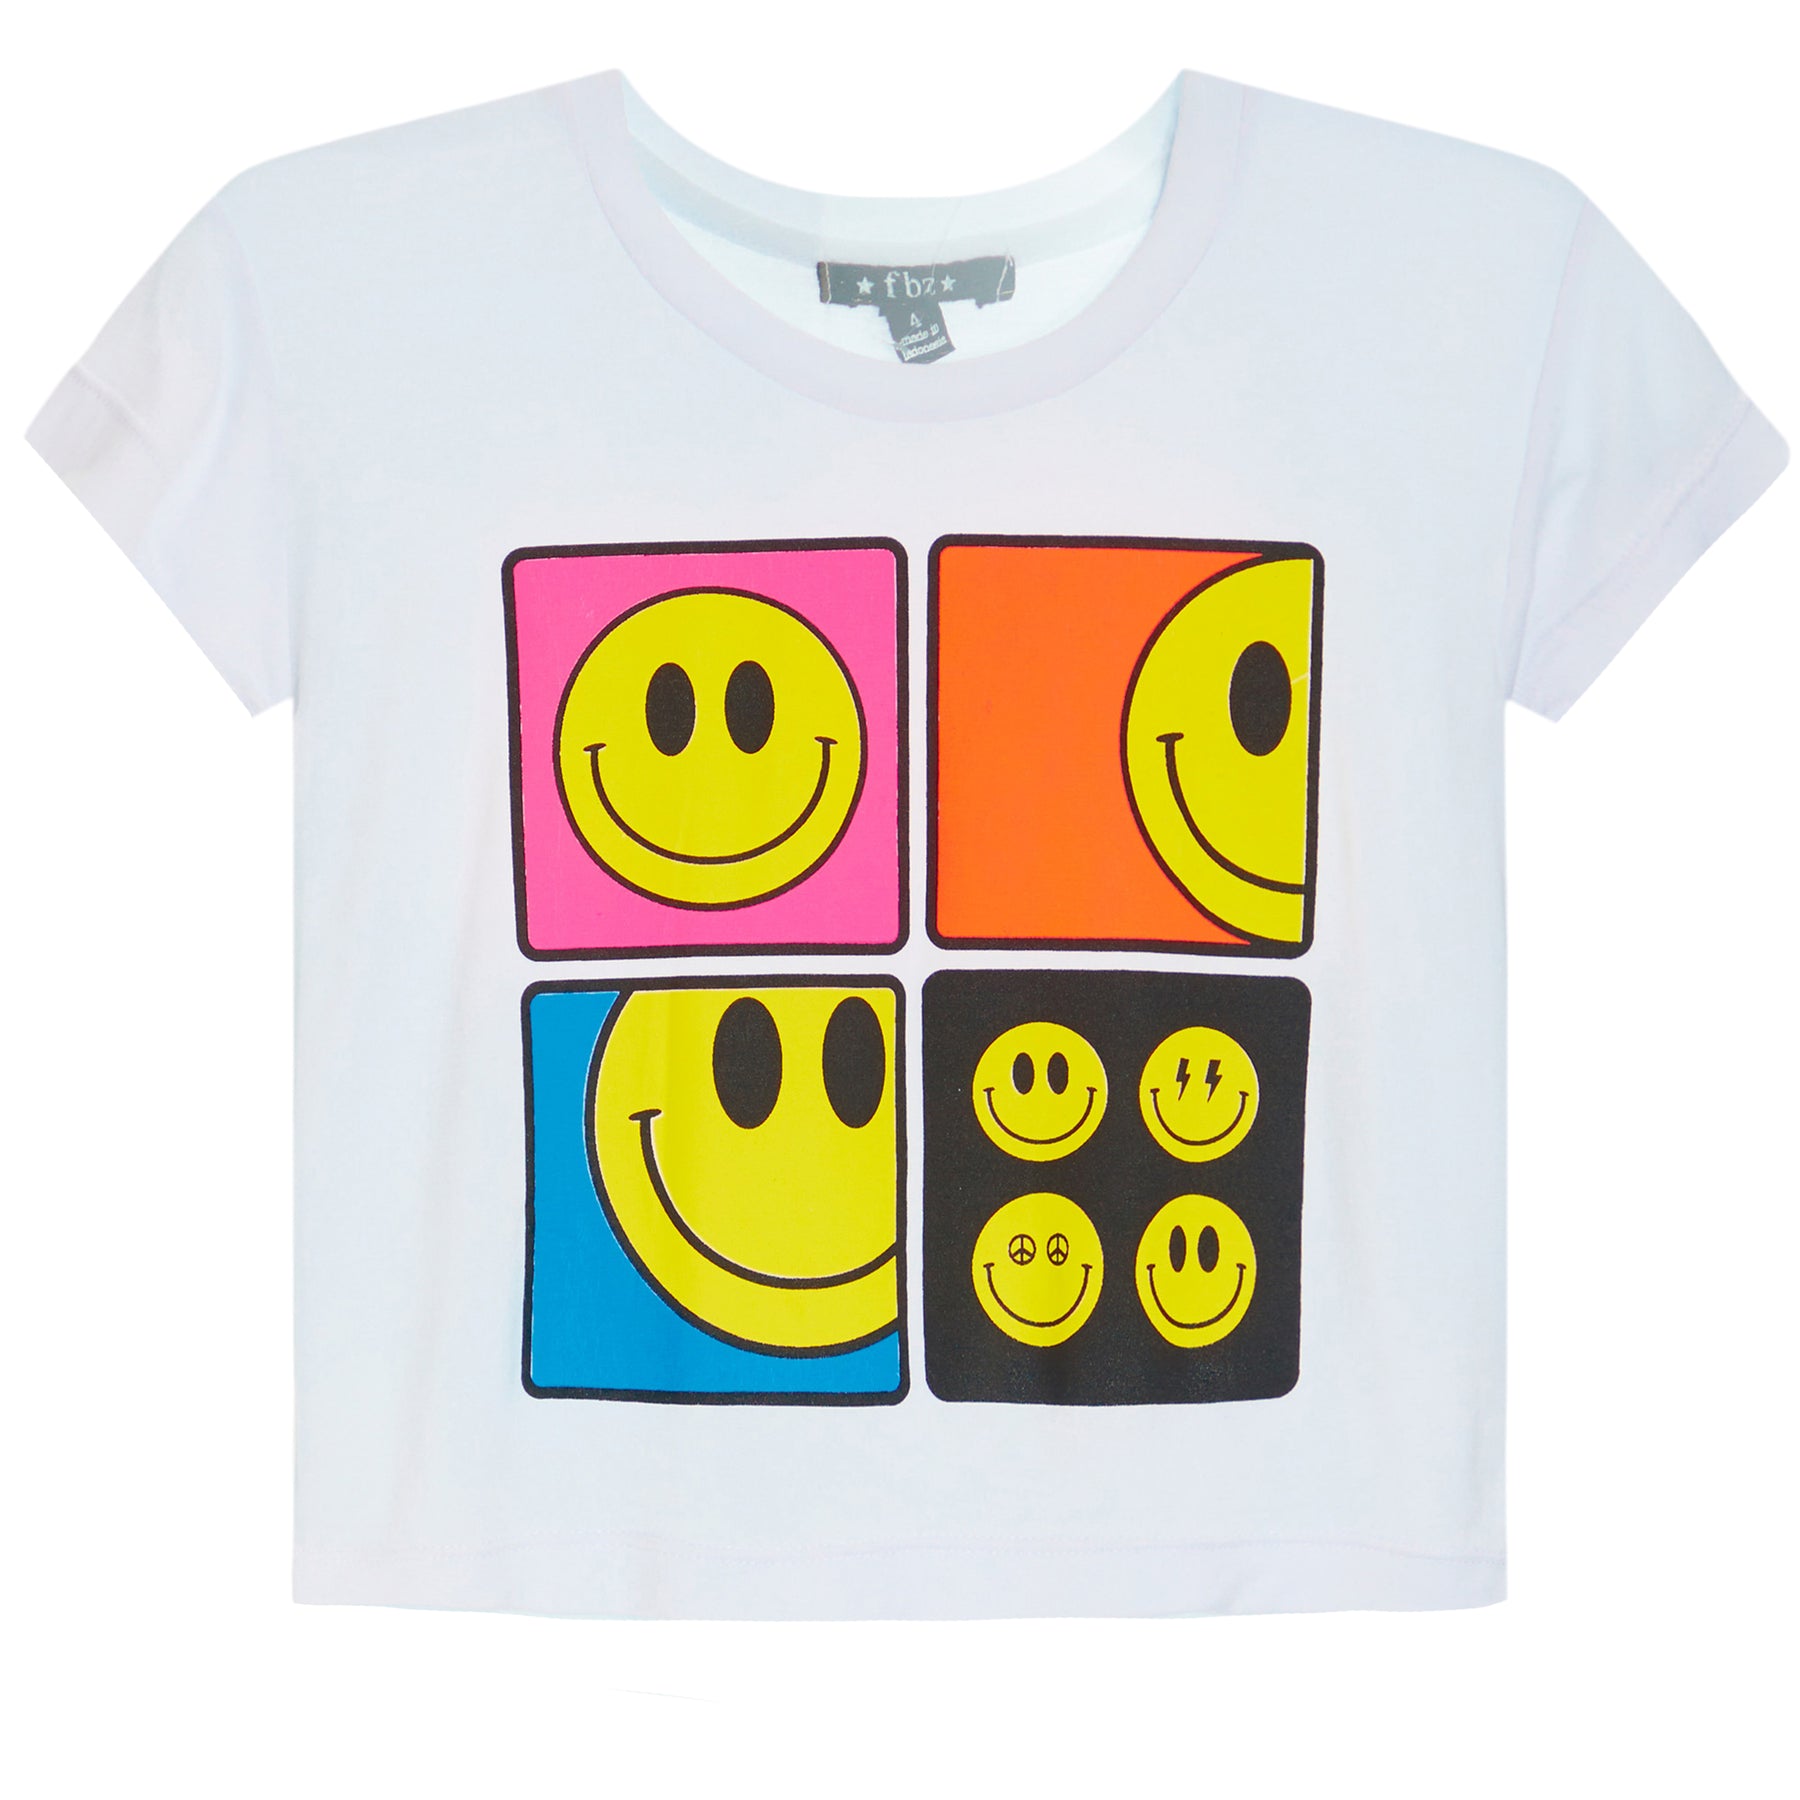 4 Square Smiley Tee